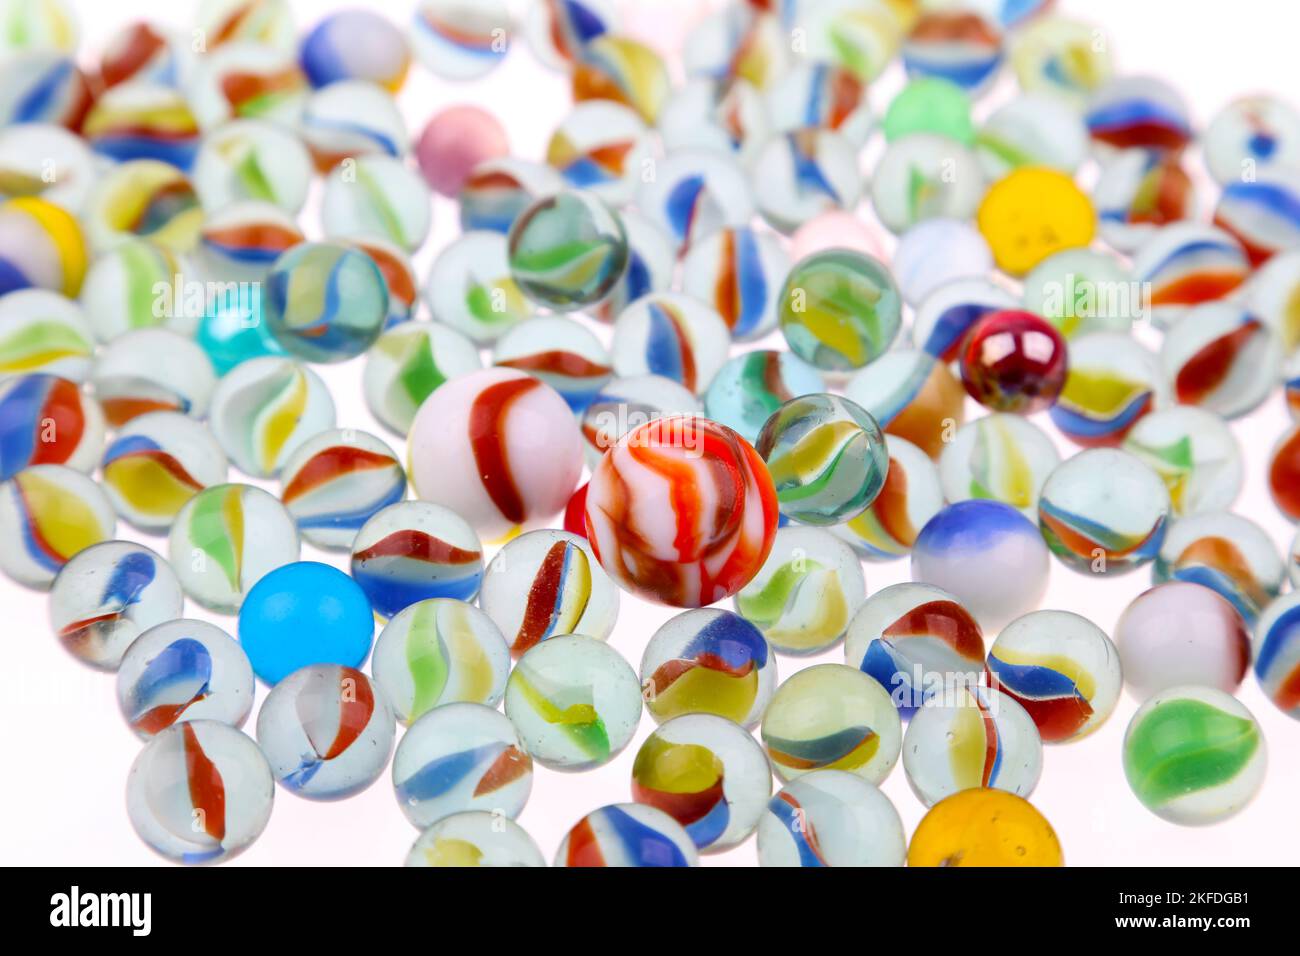 Assorted glass toy marbles balls Stock Photo